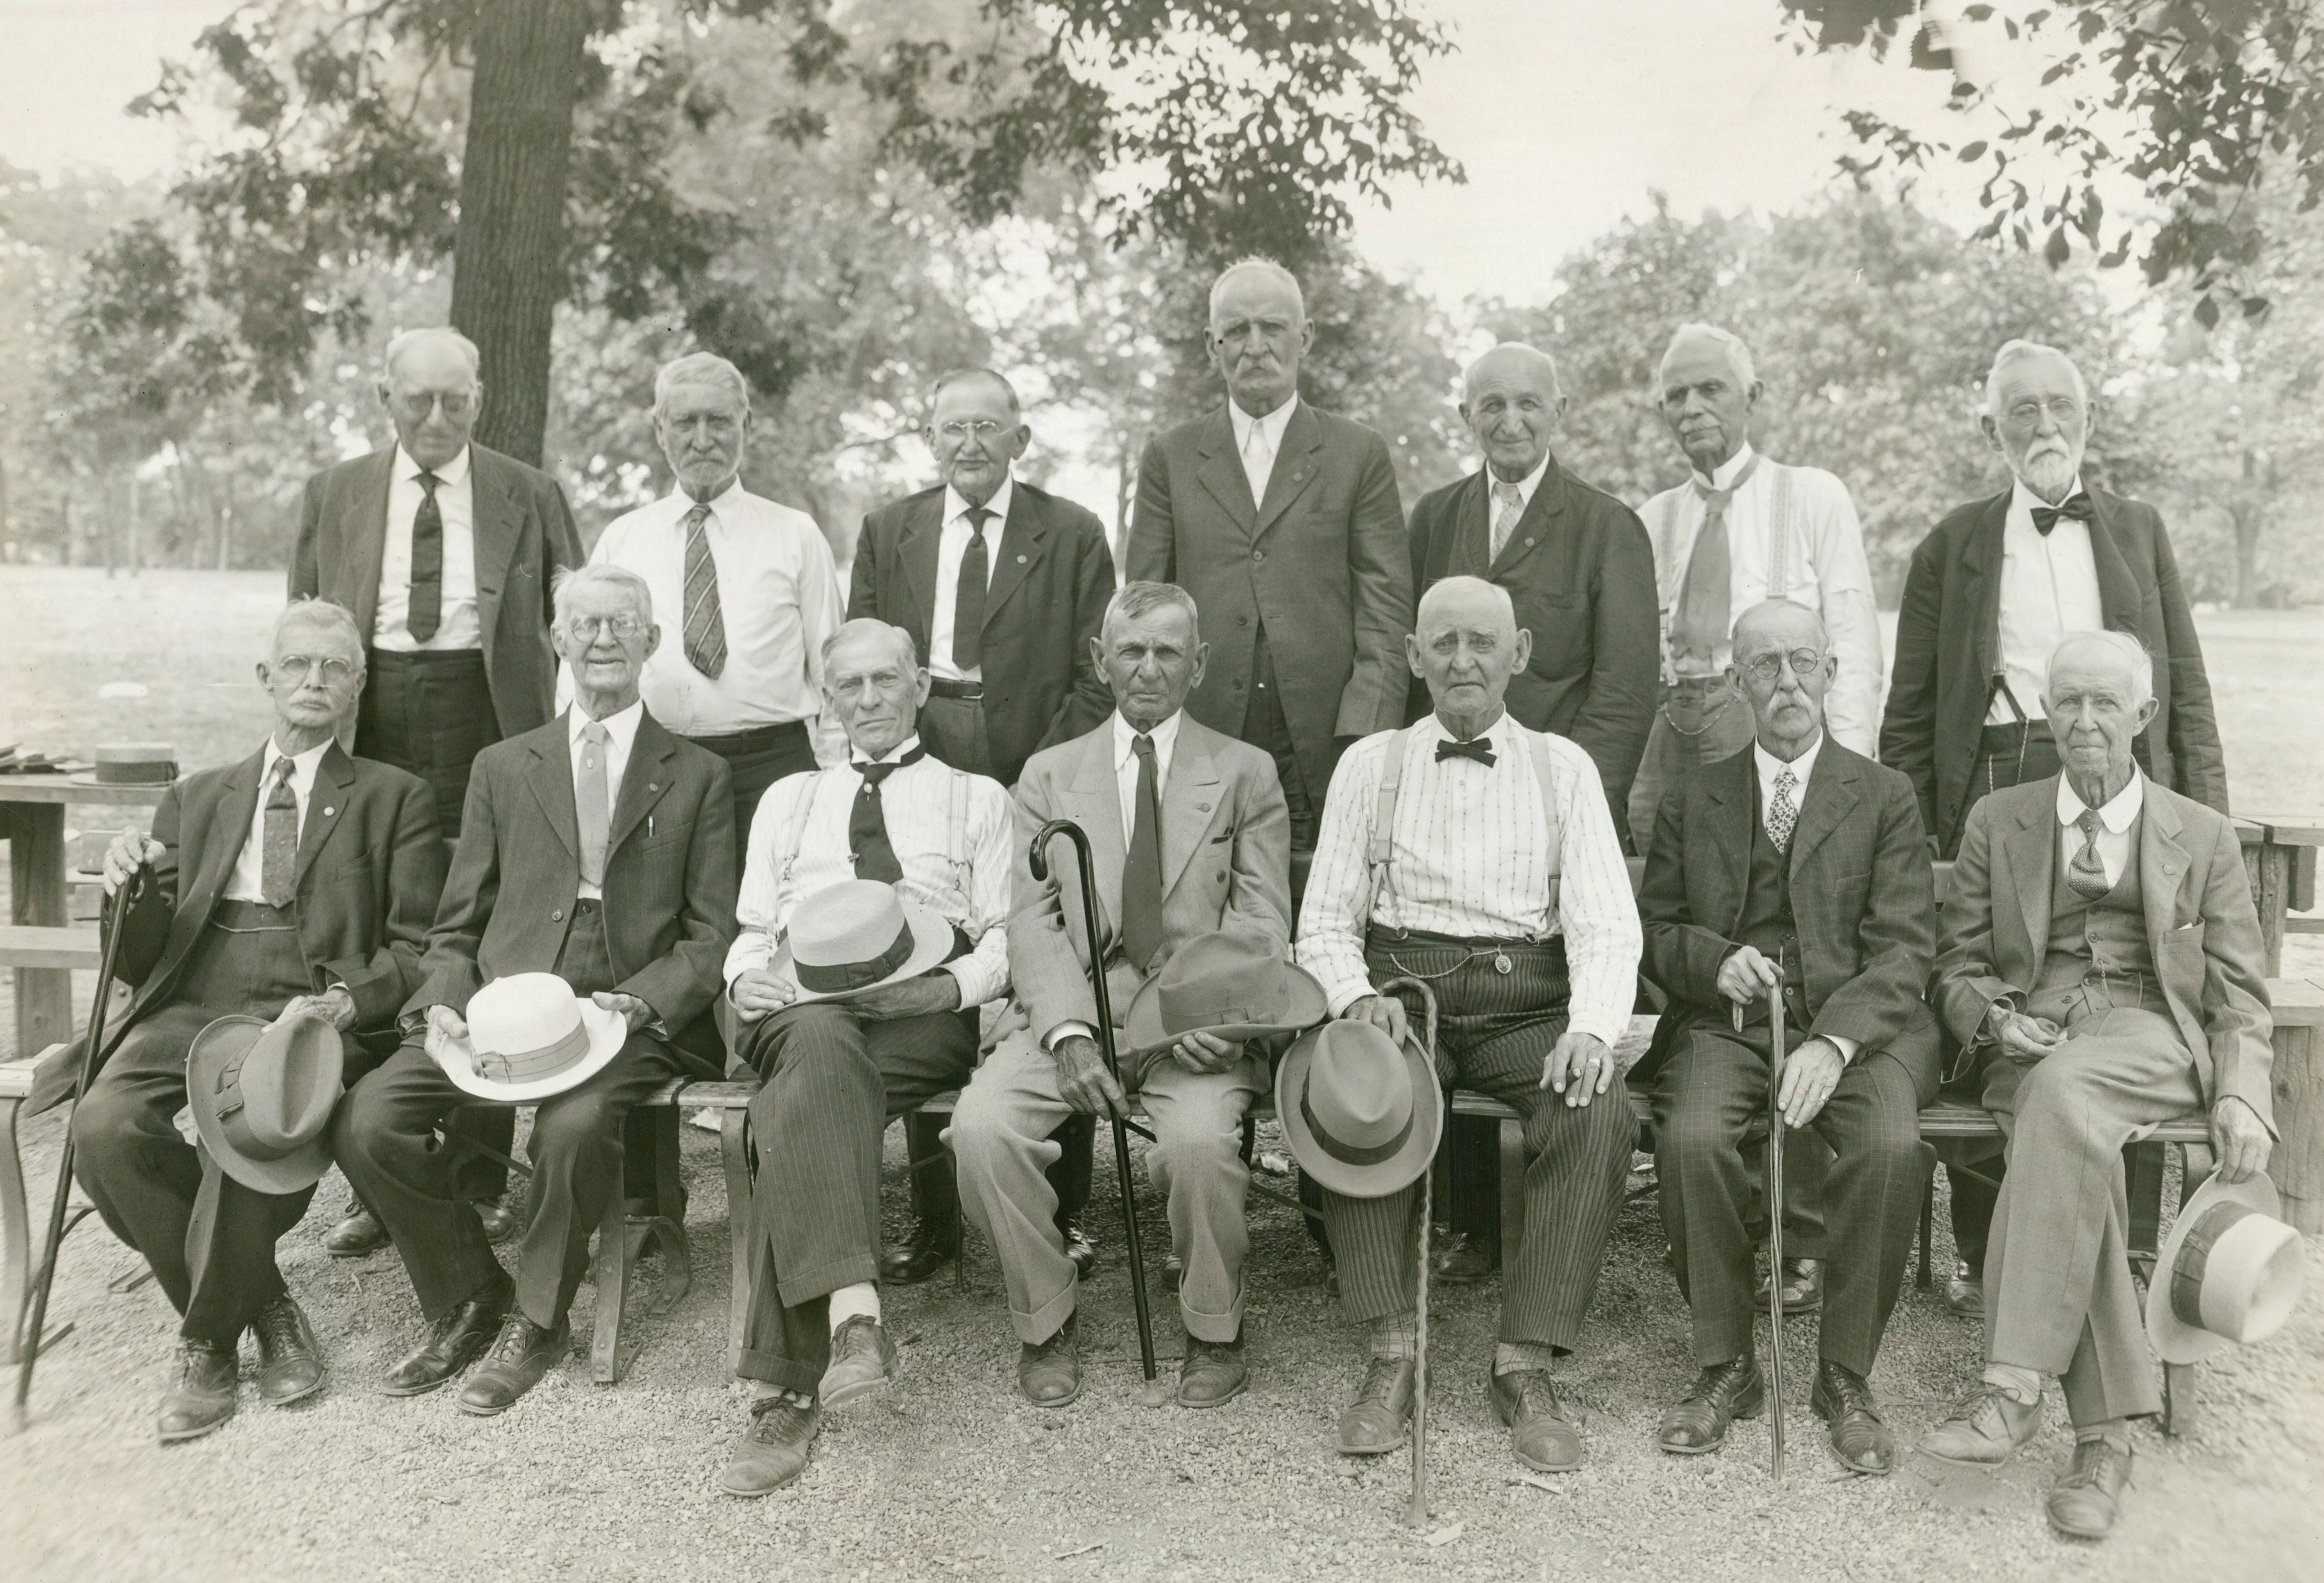 14 light-skinned men stand and sit for a photograph. They all appear to be old, some elderly.